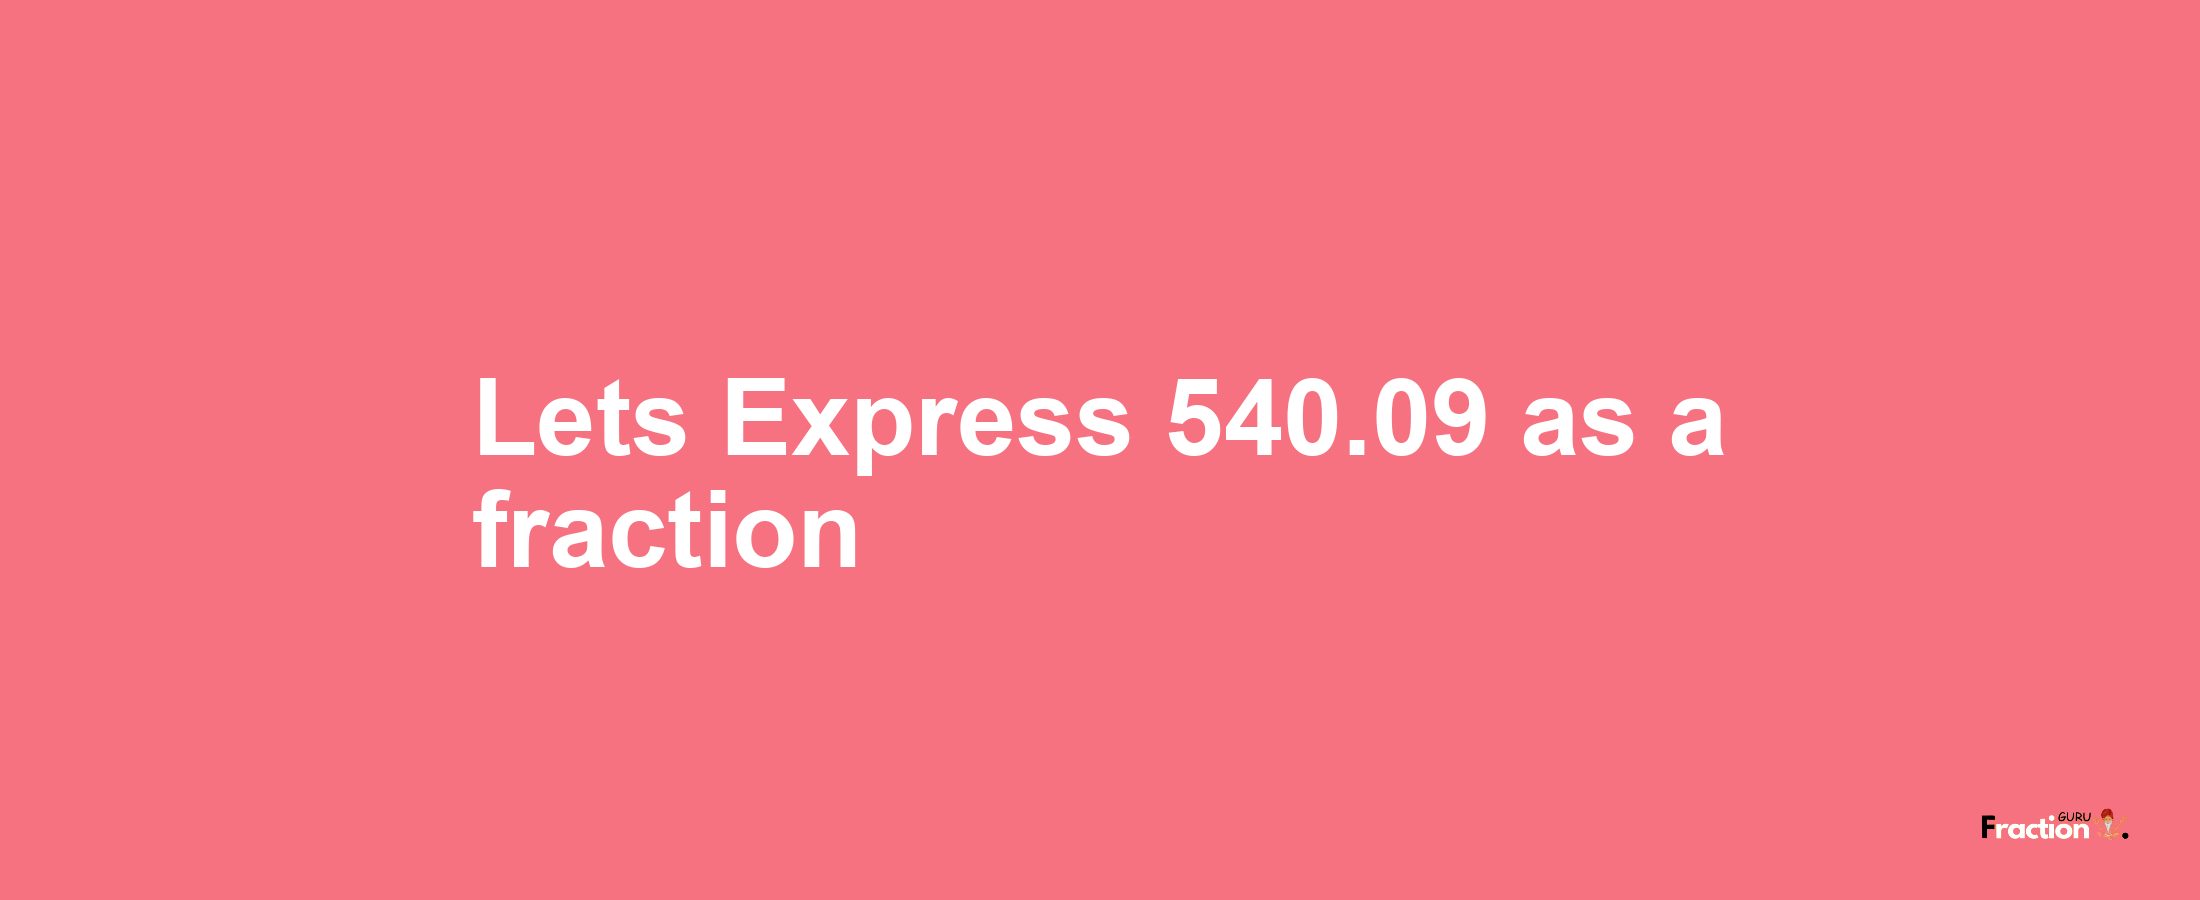 Lets Express 540.09 as afraction